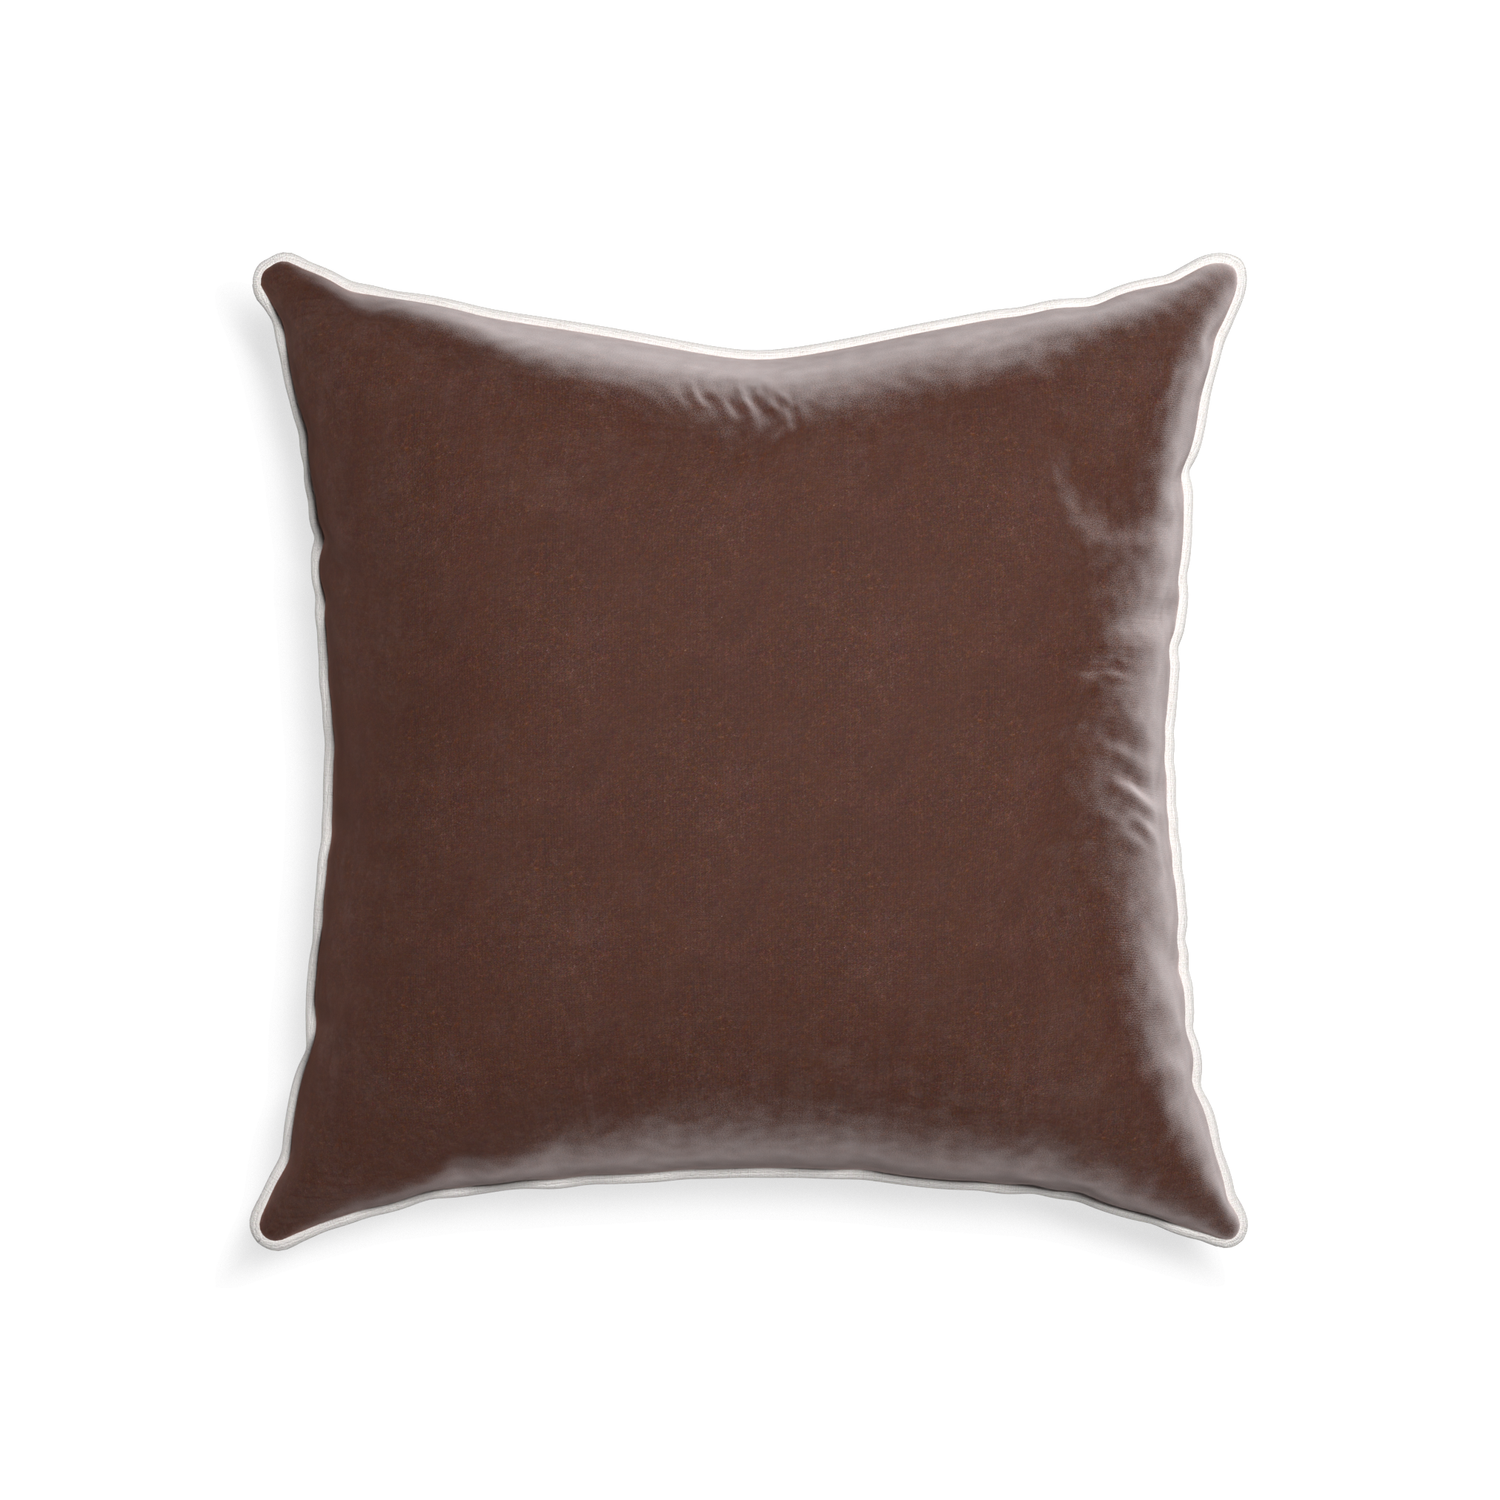 22-square walnut velvet custom pillow with snow piping on white background